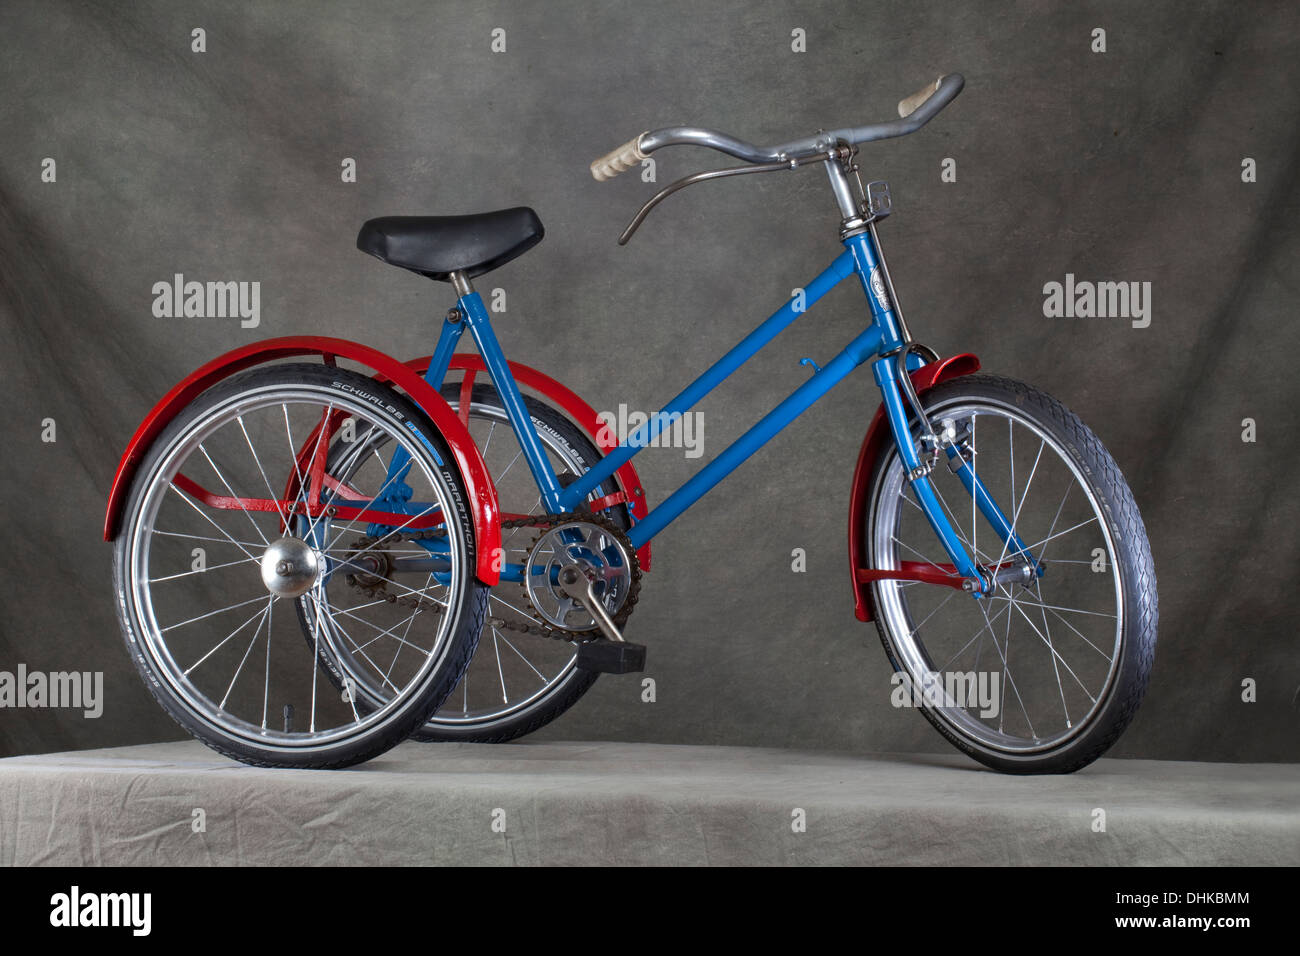 Kids Bike 1960s High Resolution Stock Photography and Images - Alamy